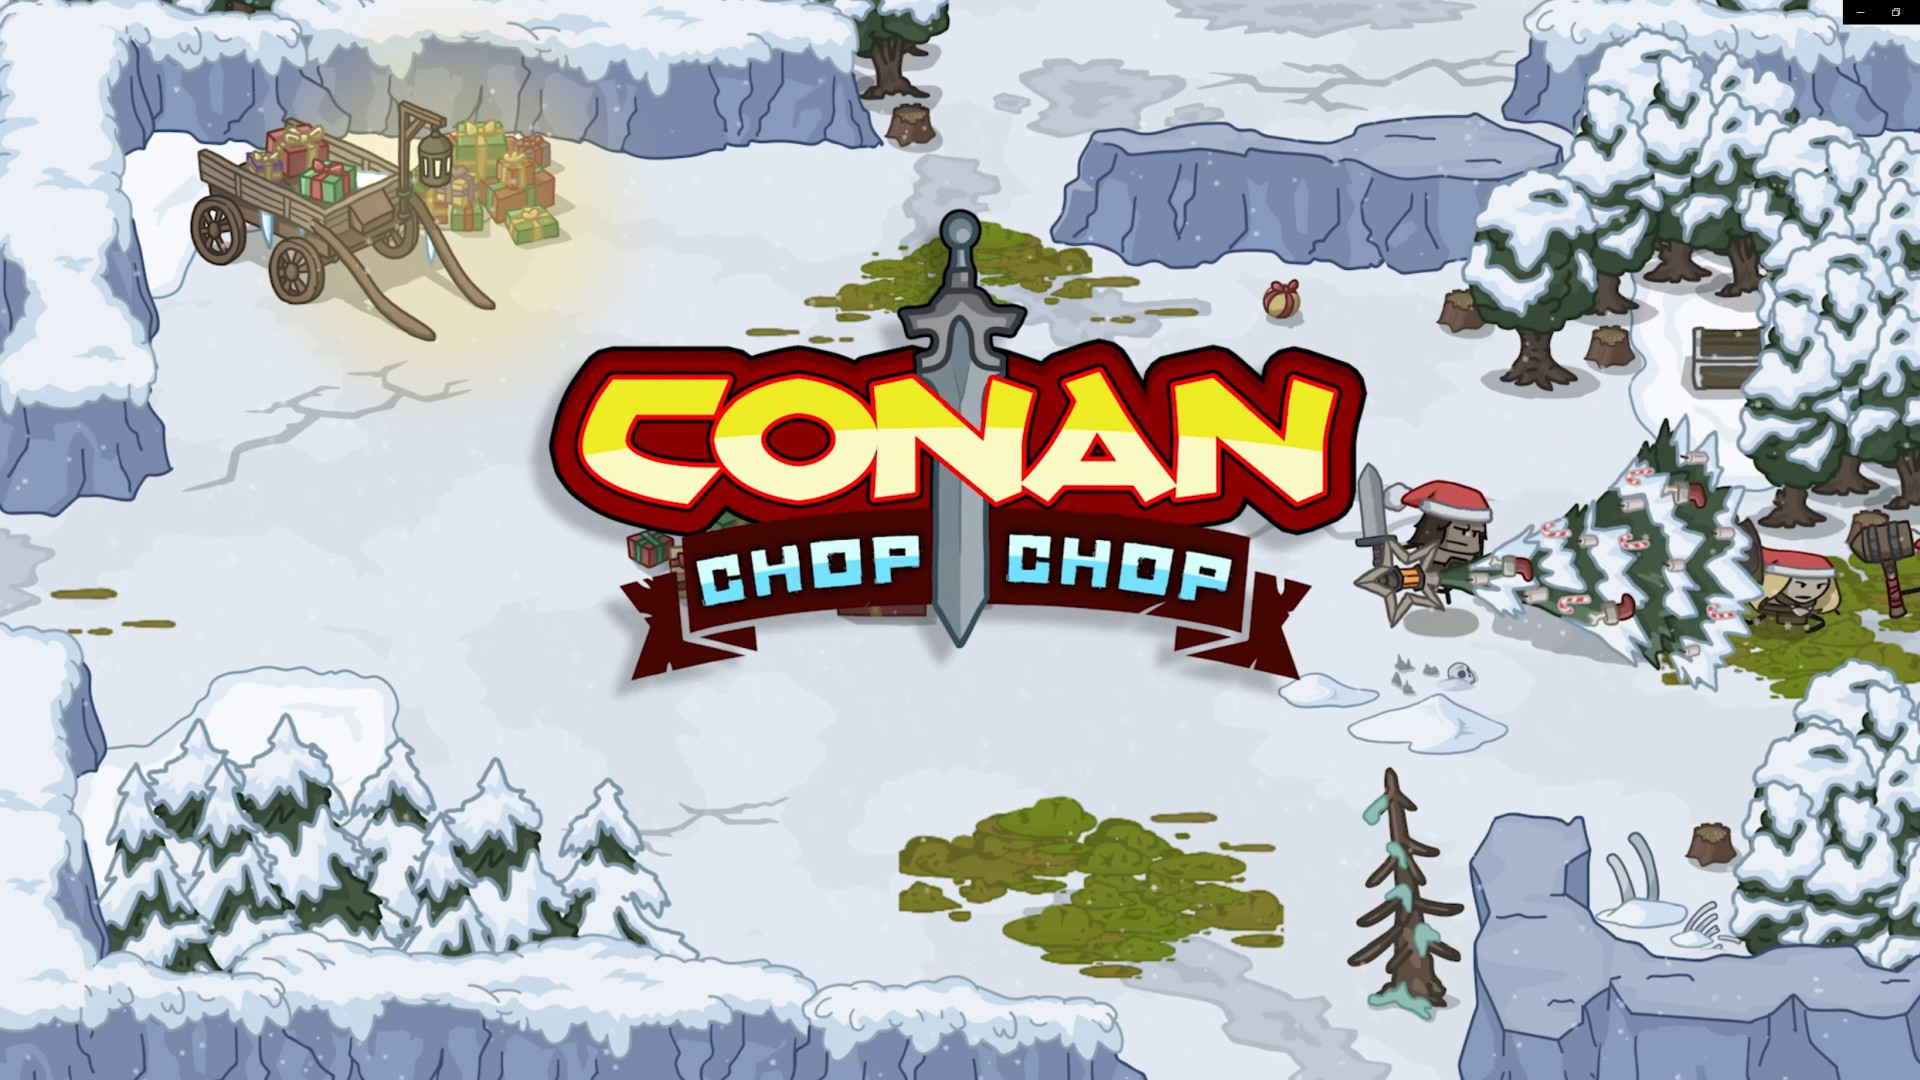 Building the World of Conan Chop Chop, Coming to Xbox One February 25, 2020